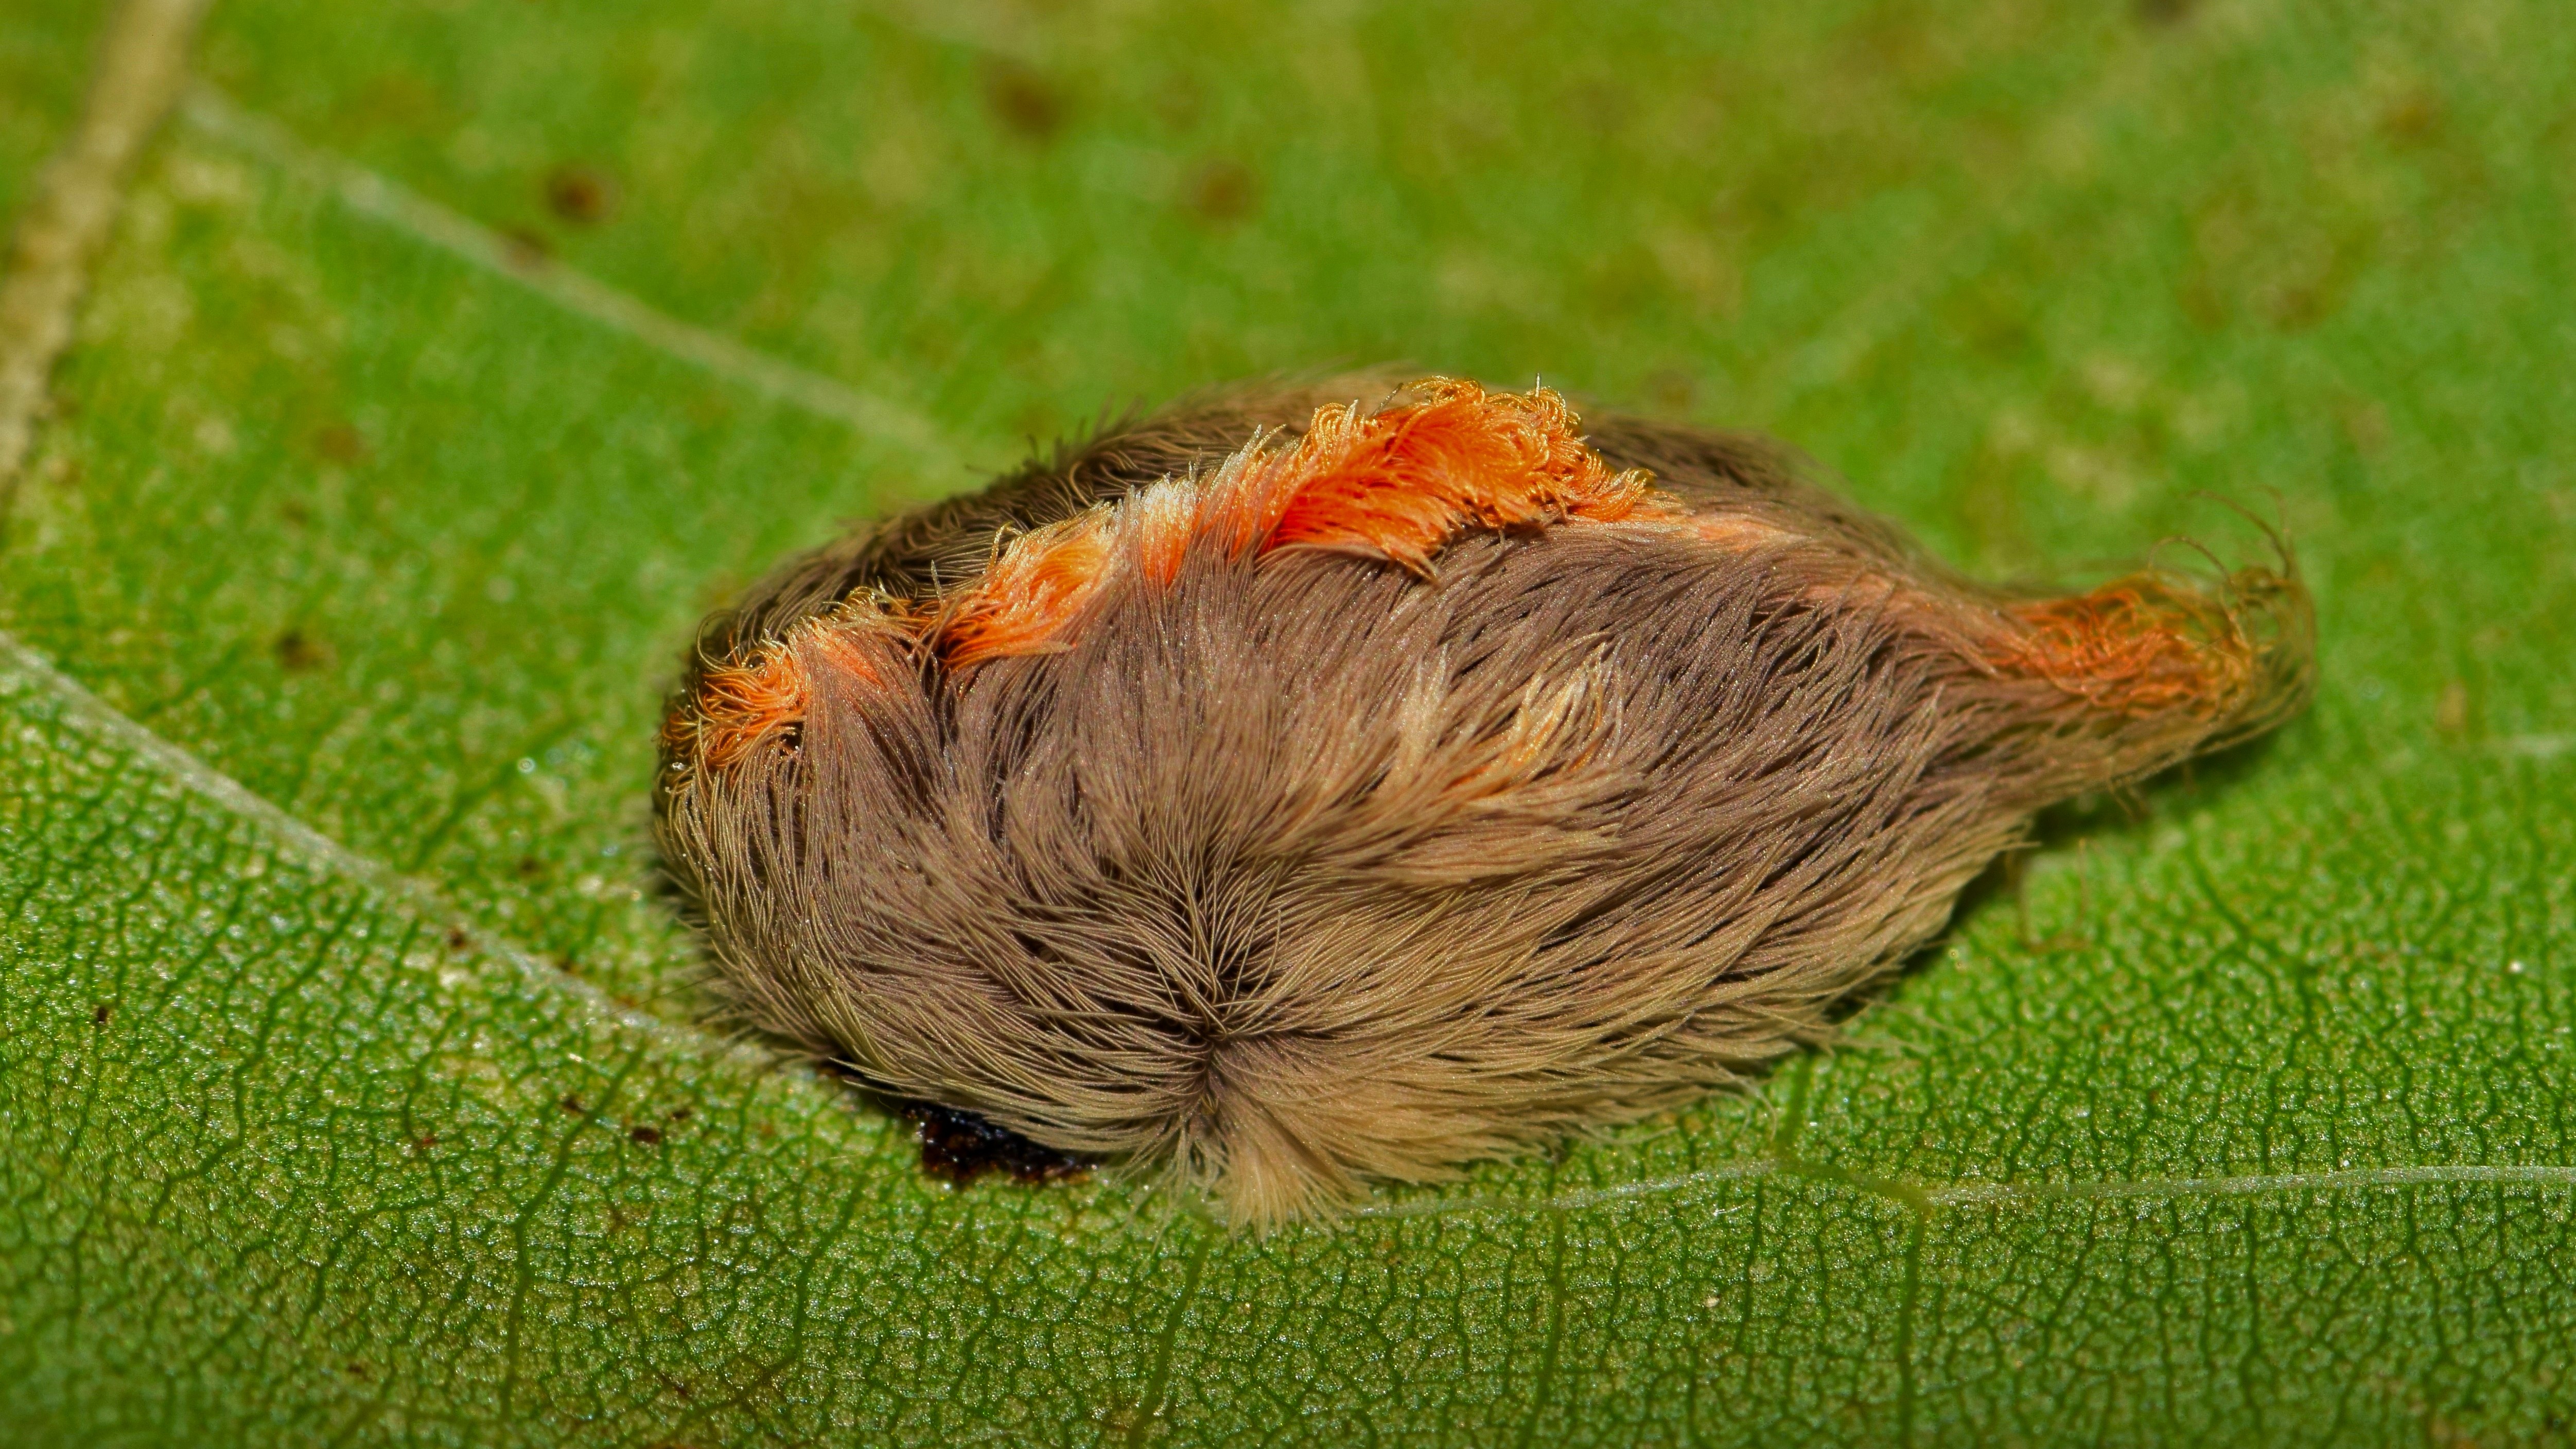 An asp caterpillar with a brown and orange fluffy coat sits on a leaf.